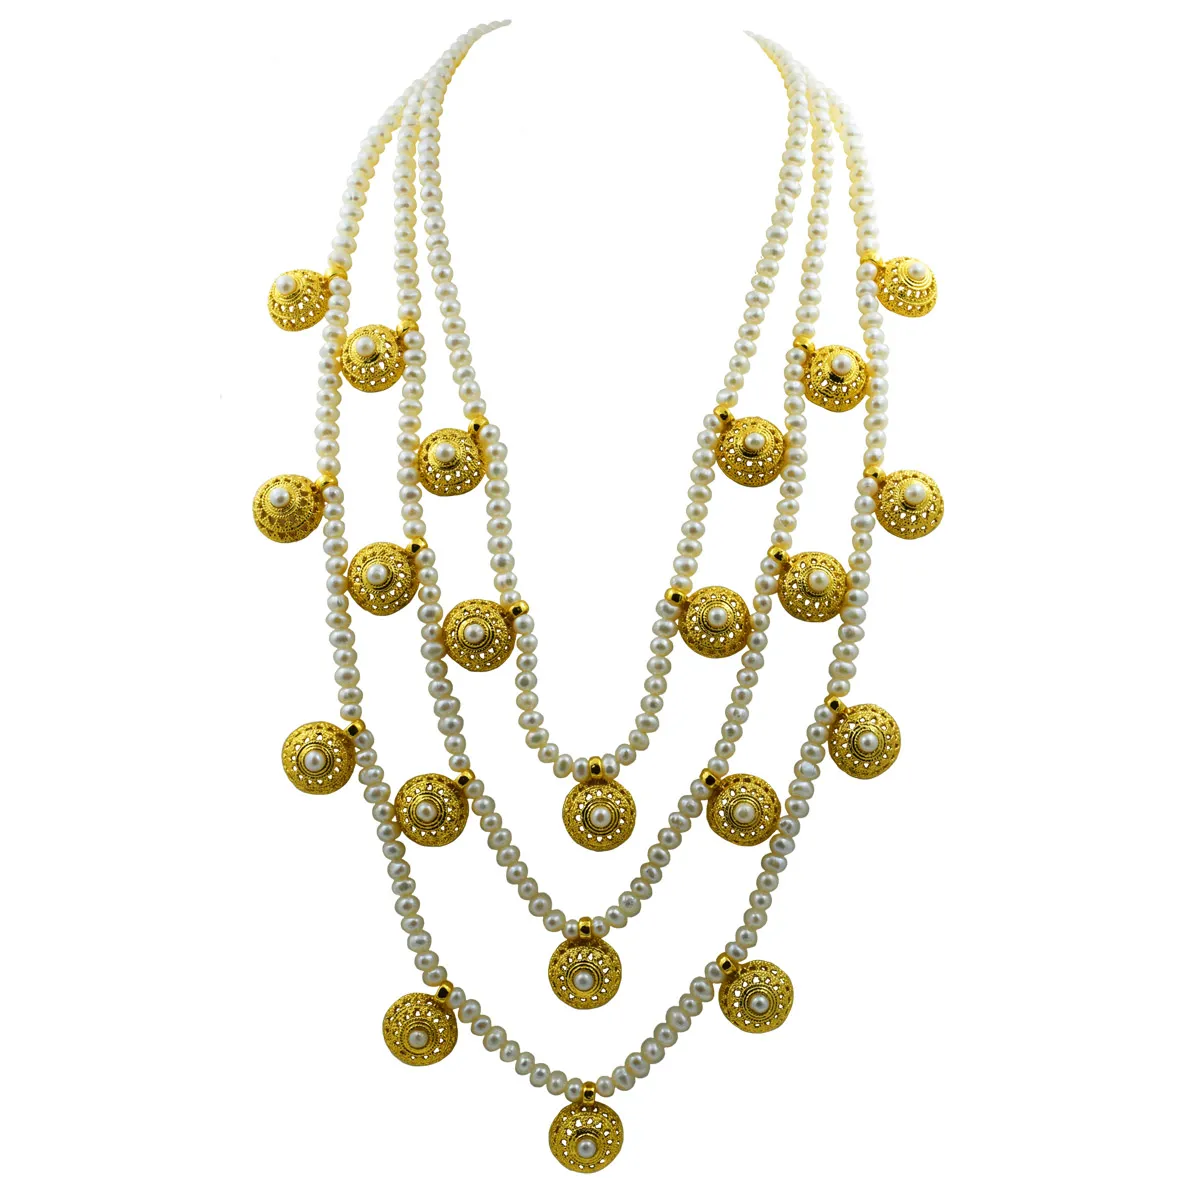 Transform Today Into Your Coronation Day with the 3 Line Rani Haar Pearl Necklace (SN1051)